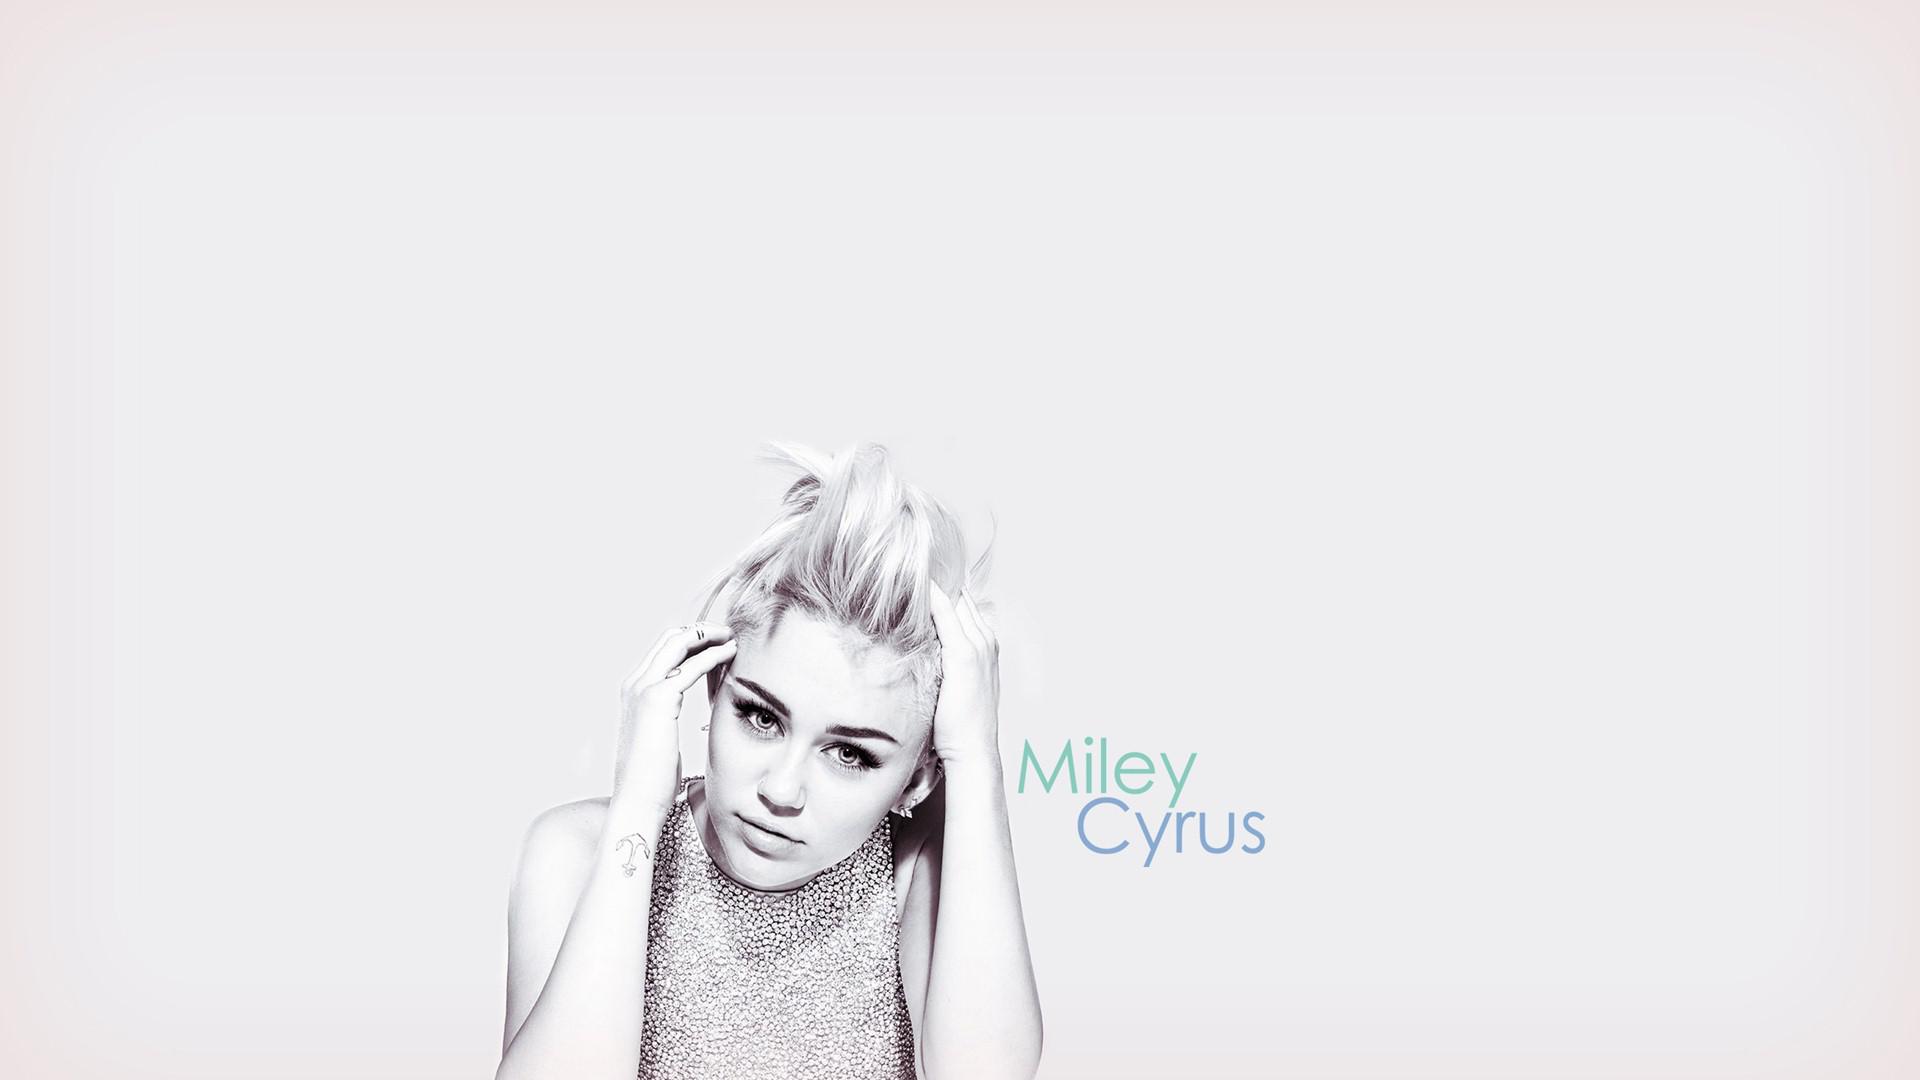 miley cyrus white background wallpaper